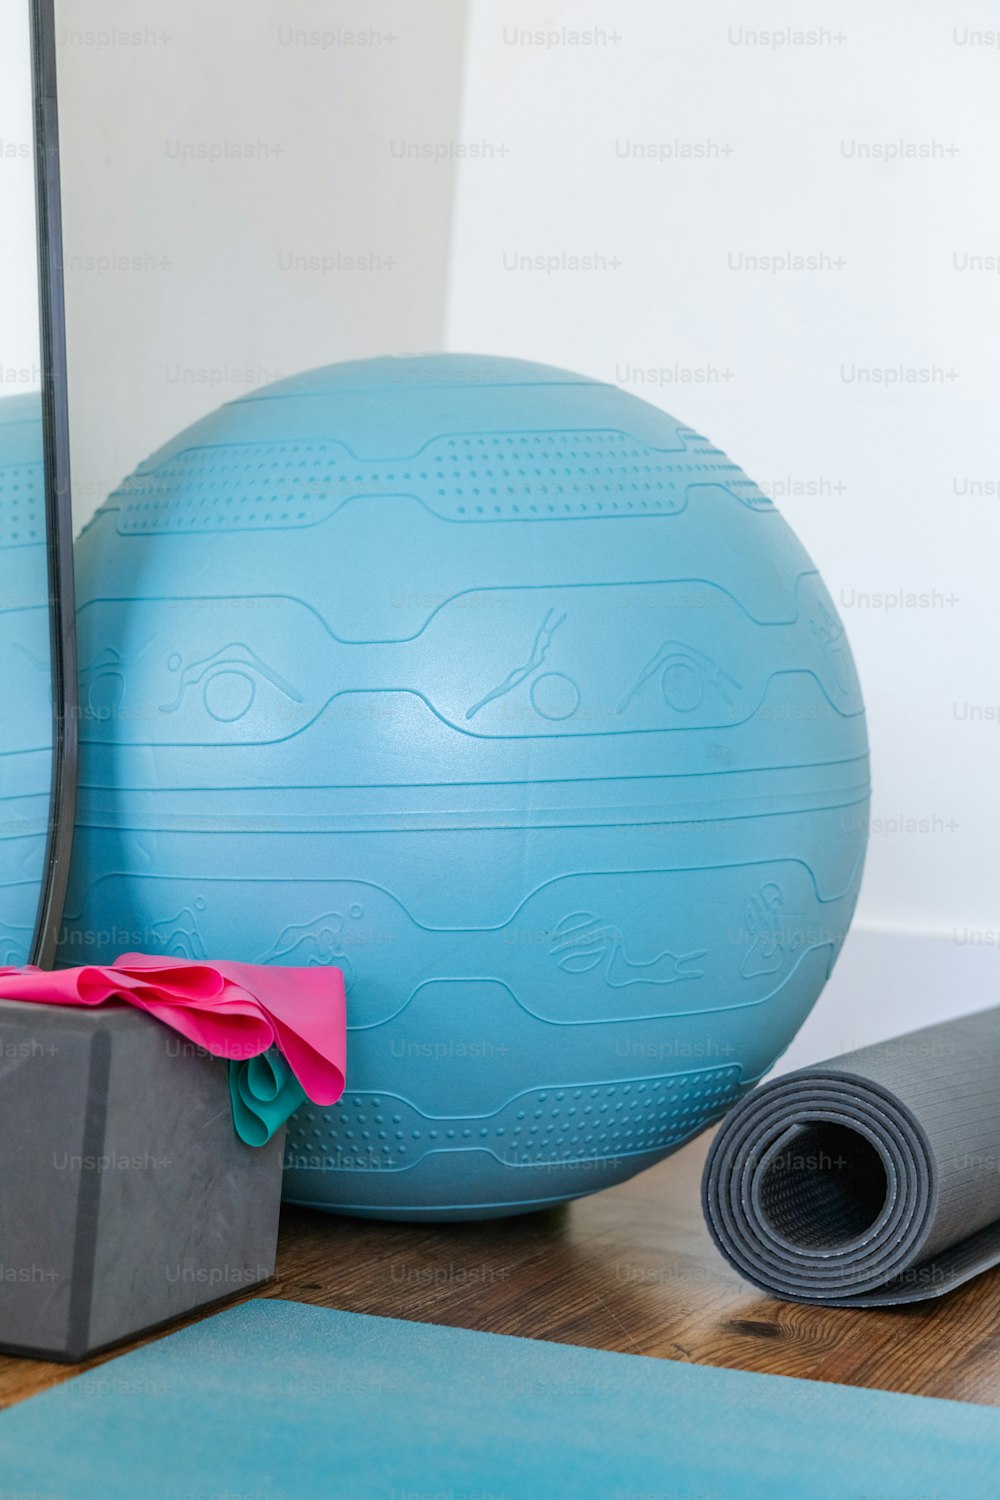 a blue exercise ball, yoga mat, and exercise bag on a wooden floor